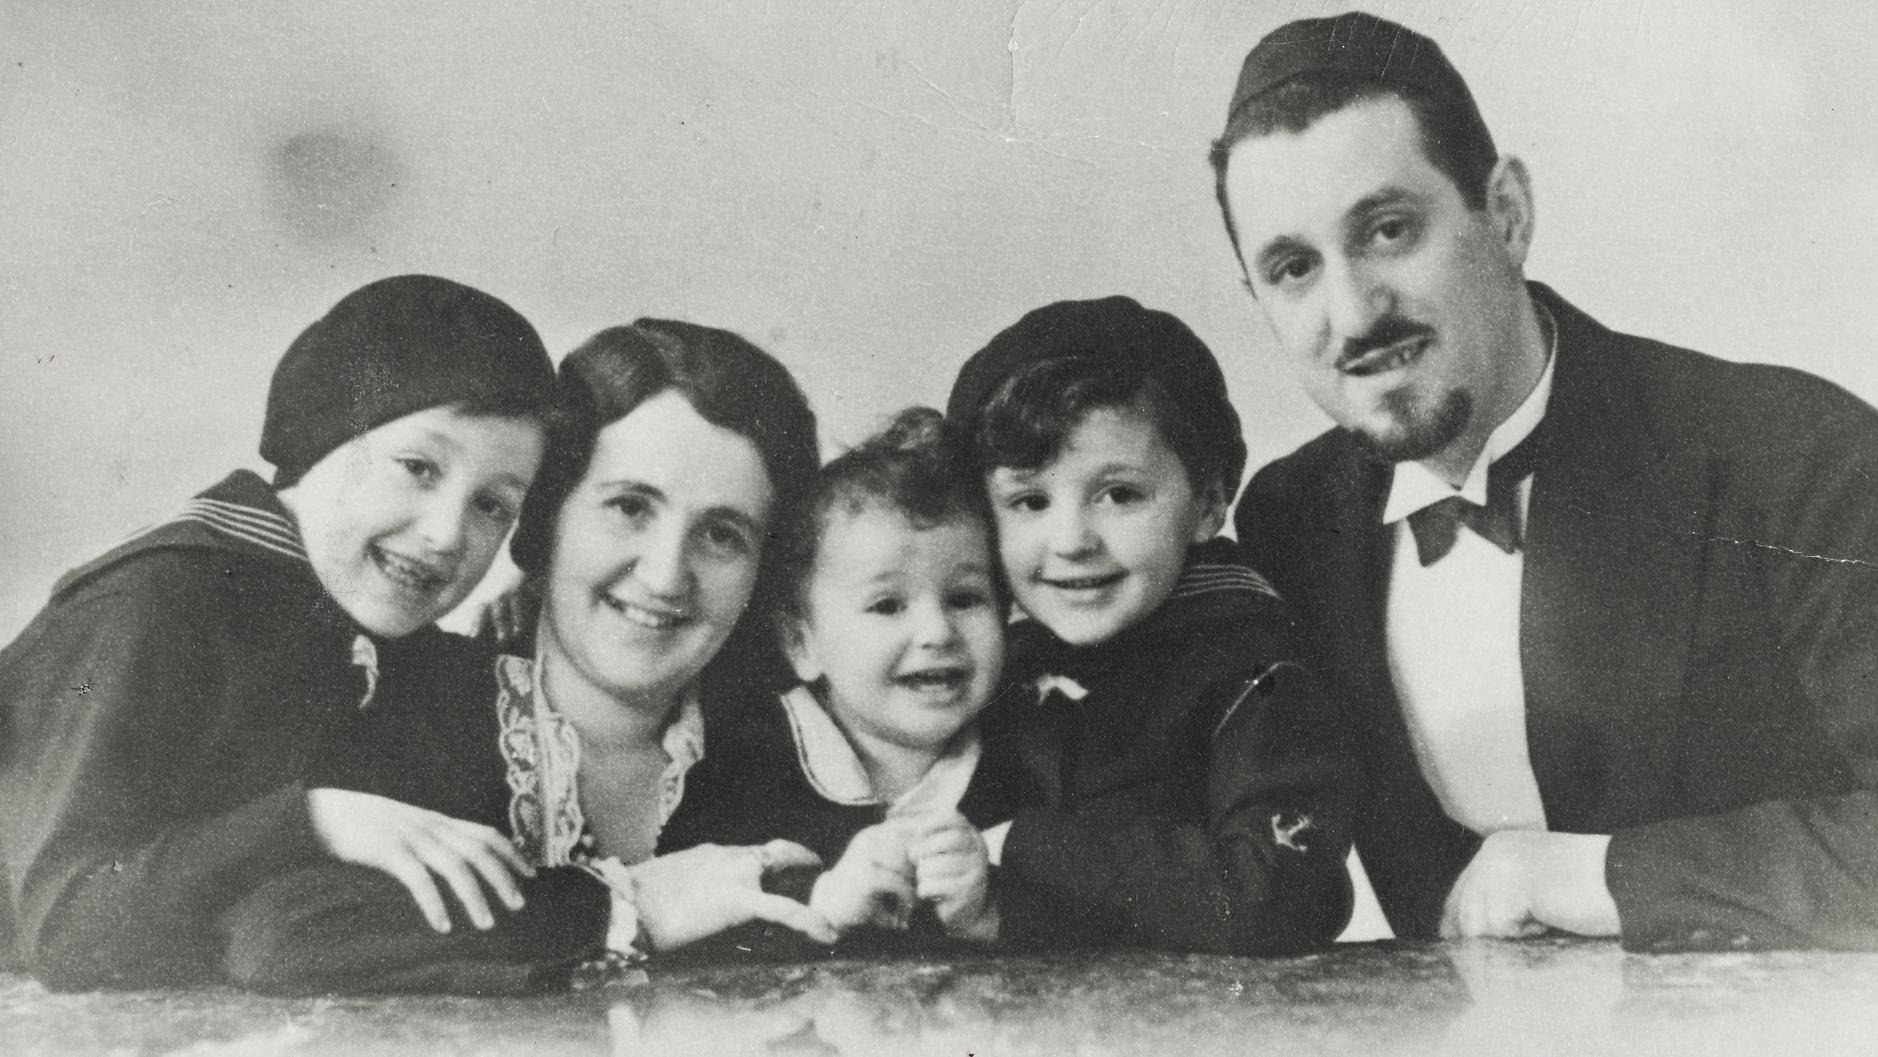 Leo Goldberger and his family came from Czechoslovakia, but they moved to Denmark before World War II. That decision was the reason they escaped the Holocaust.